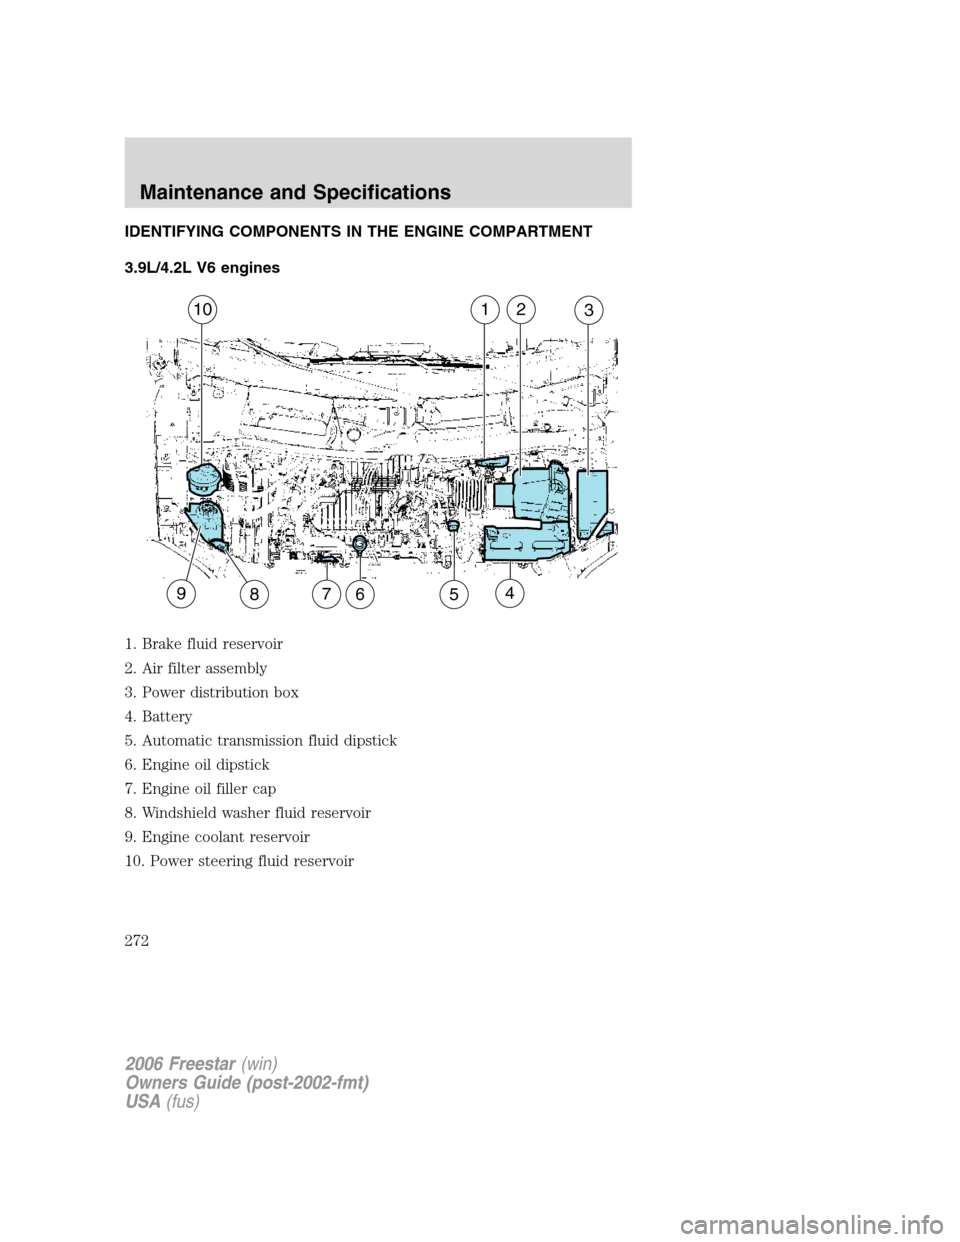 FORD FREESTAR 2006 1.G Service Manual IDENTIFYING COMPONENTS IN THE ENGINE COMPARTMENT
3.9L/4.2L V6 engines
1. Brake fluid reservoir
2. Air filter assembly
3. Power distribution box
4. Battery
5. Automatic transmission fluid dipstick
6. E